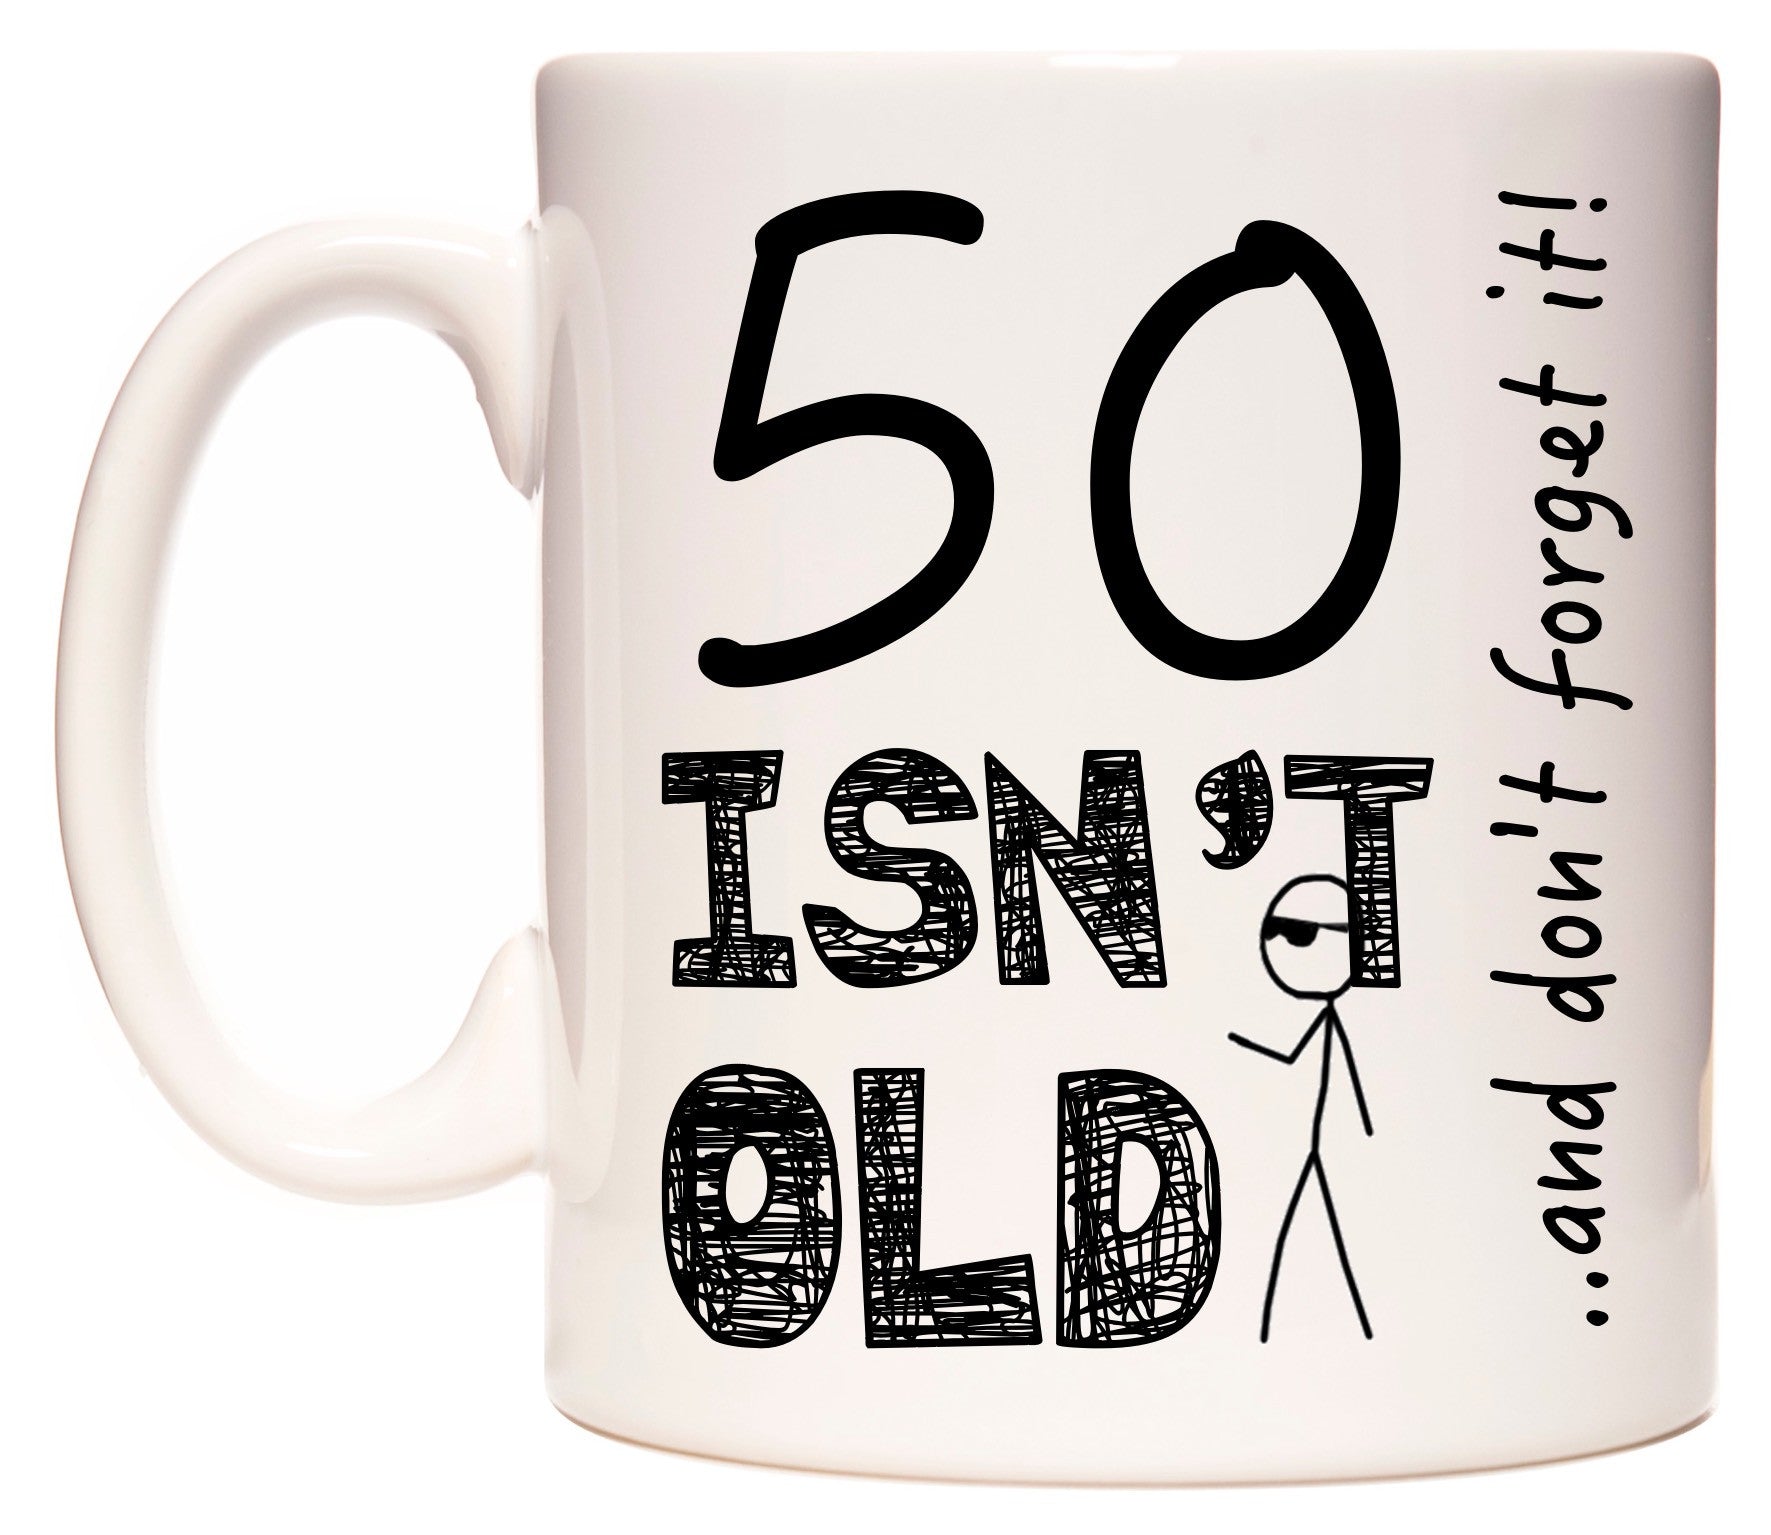 This mug features 50 Isn't Old